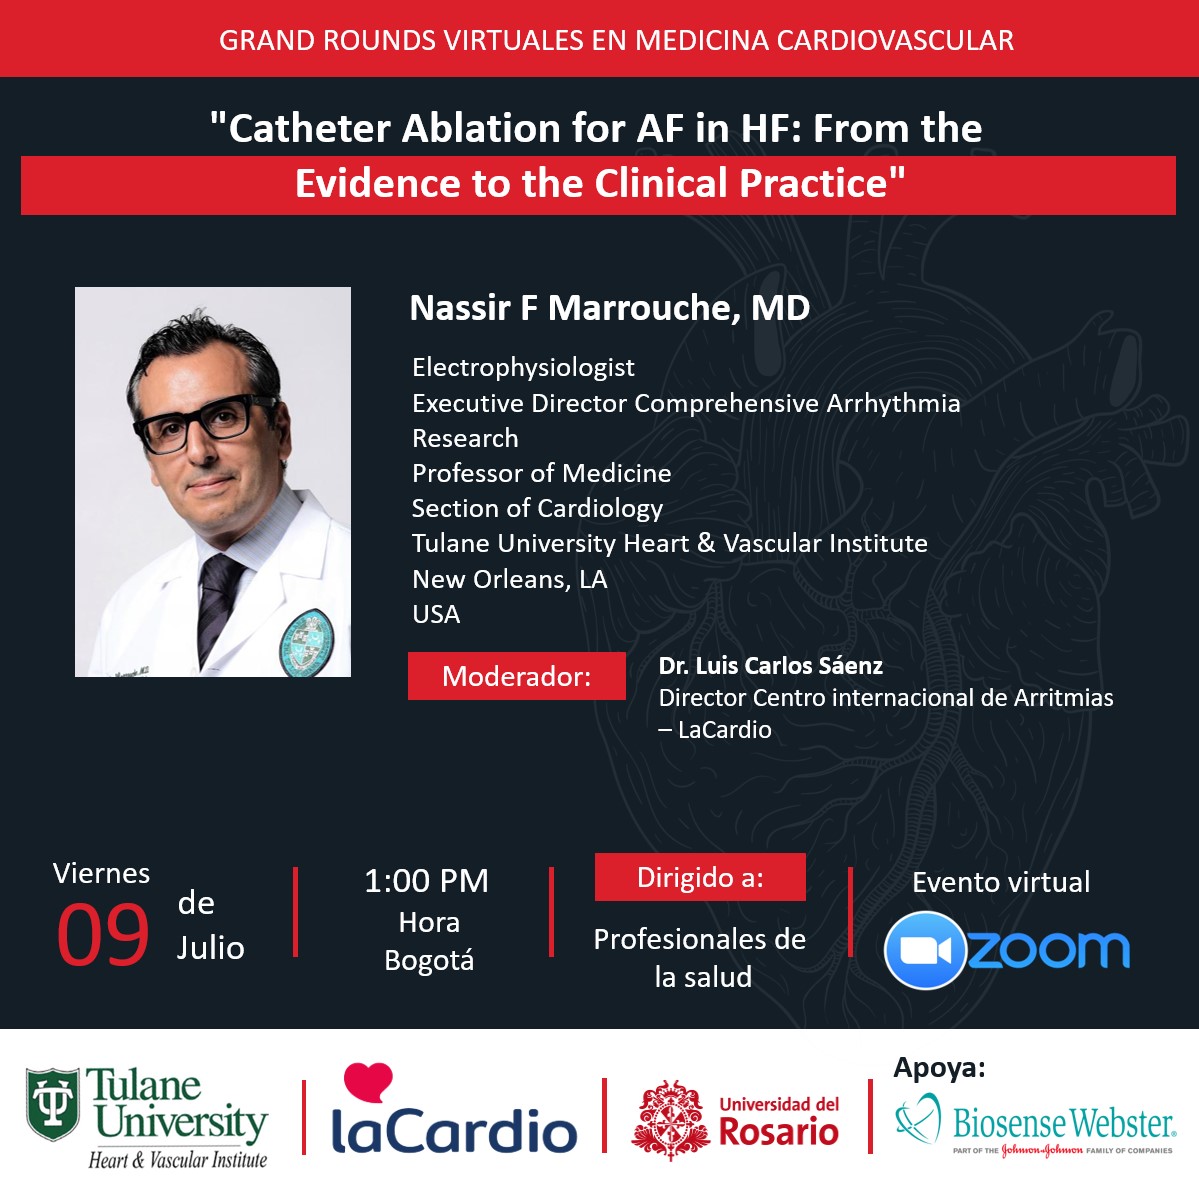 Grand Rounds en Medicina Cardiovascular: Catheter Ablation for AF in HF: From the Evidence to the Clinical Practice